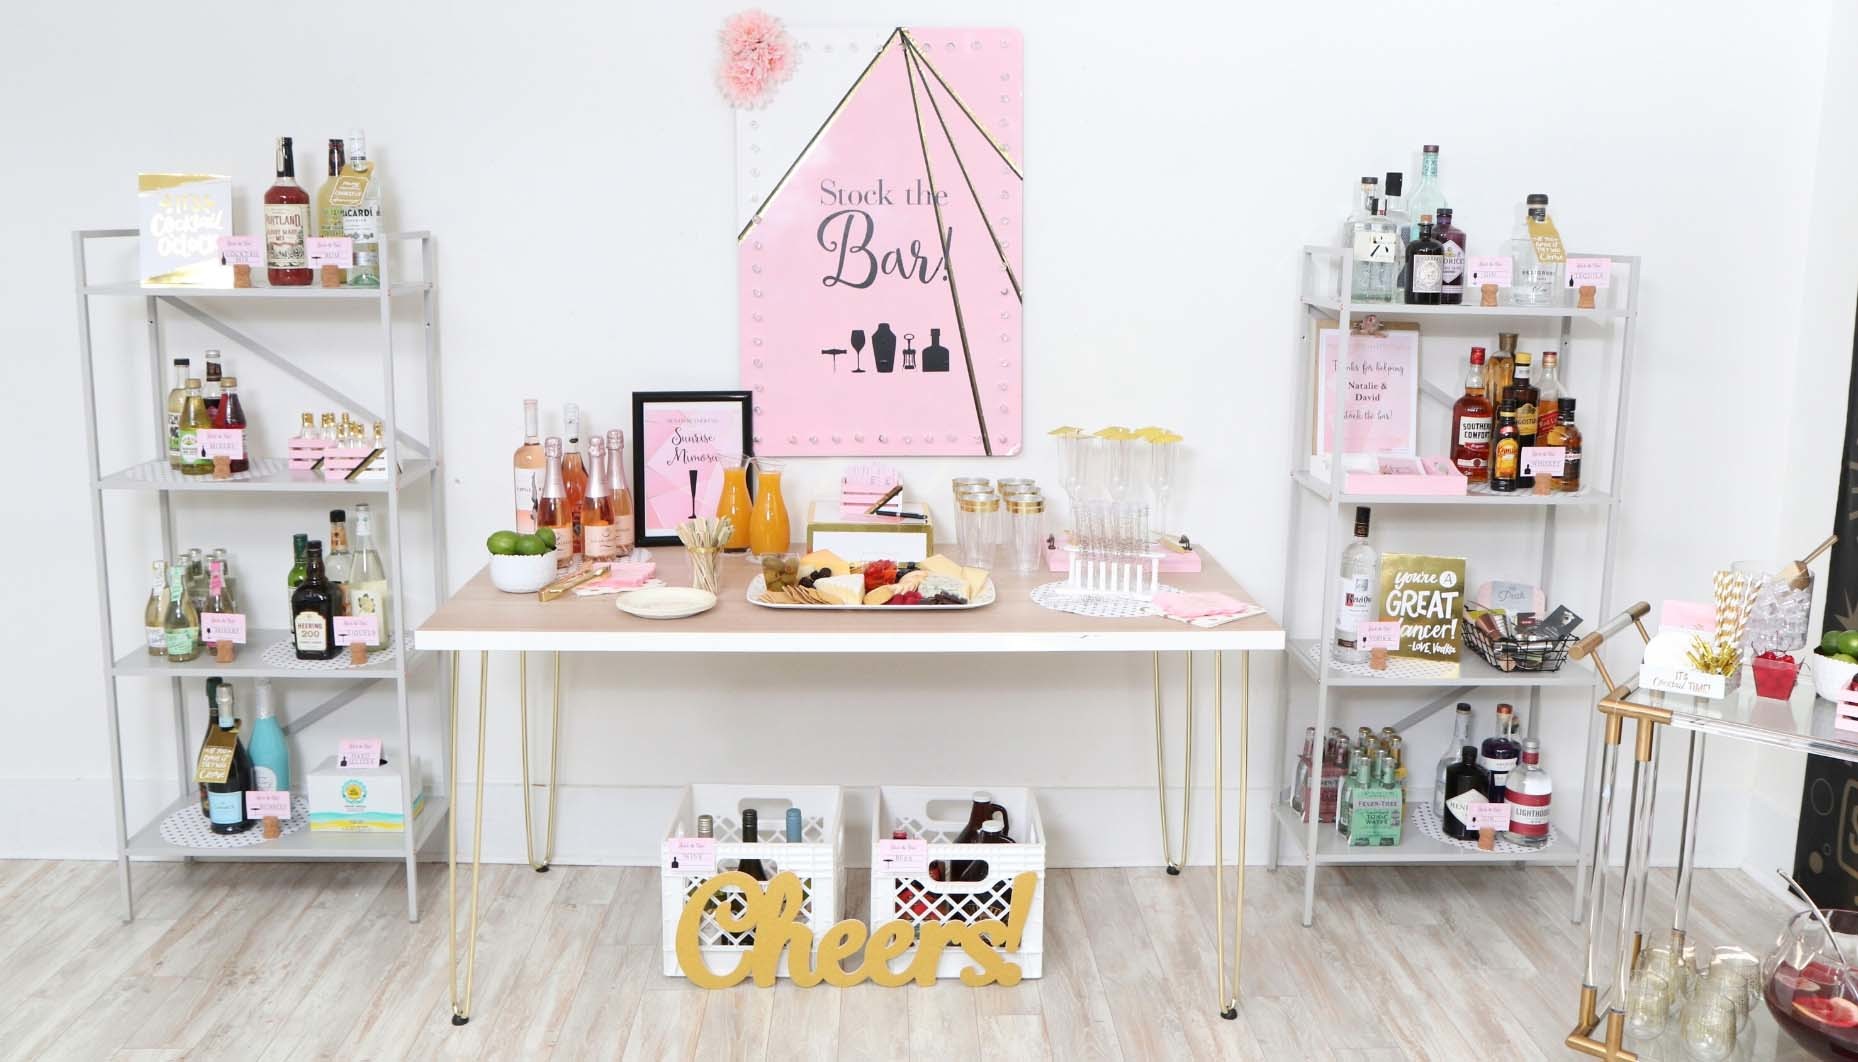 The 20 Best Gifts for a Stock-the-Bar Wedding Shower